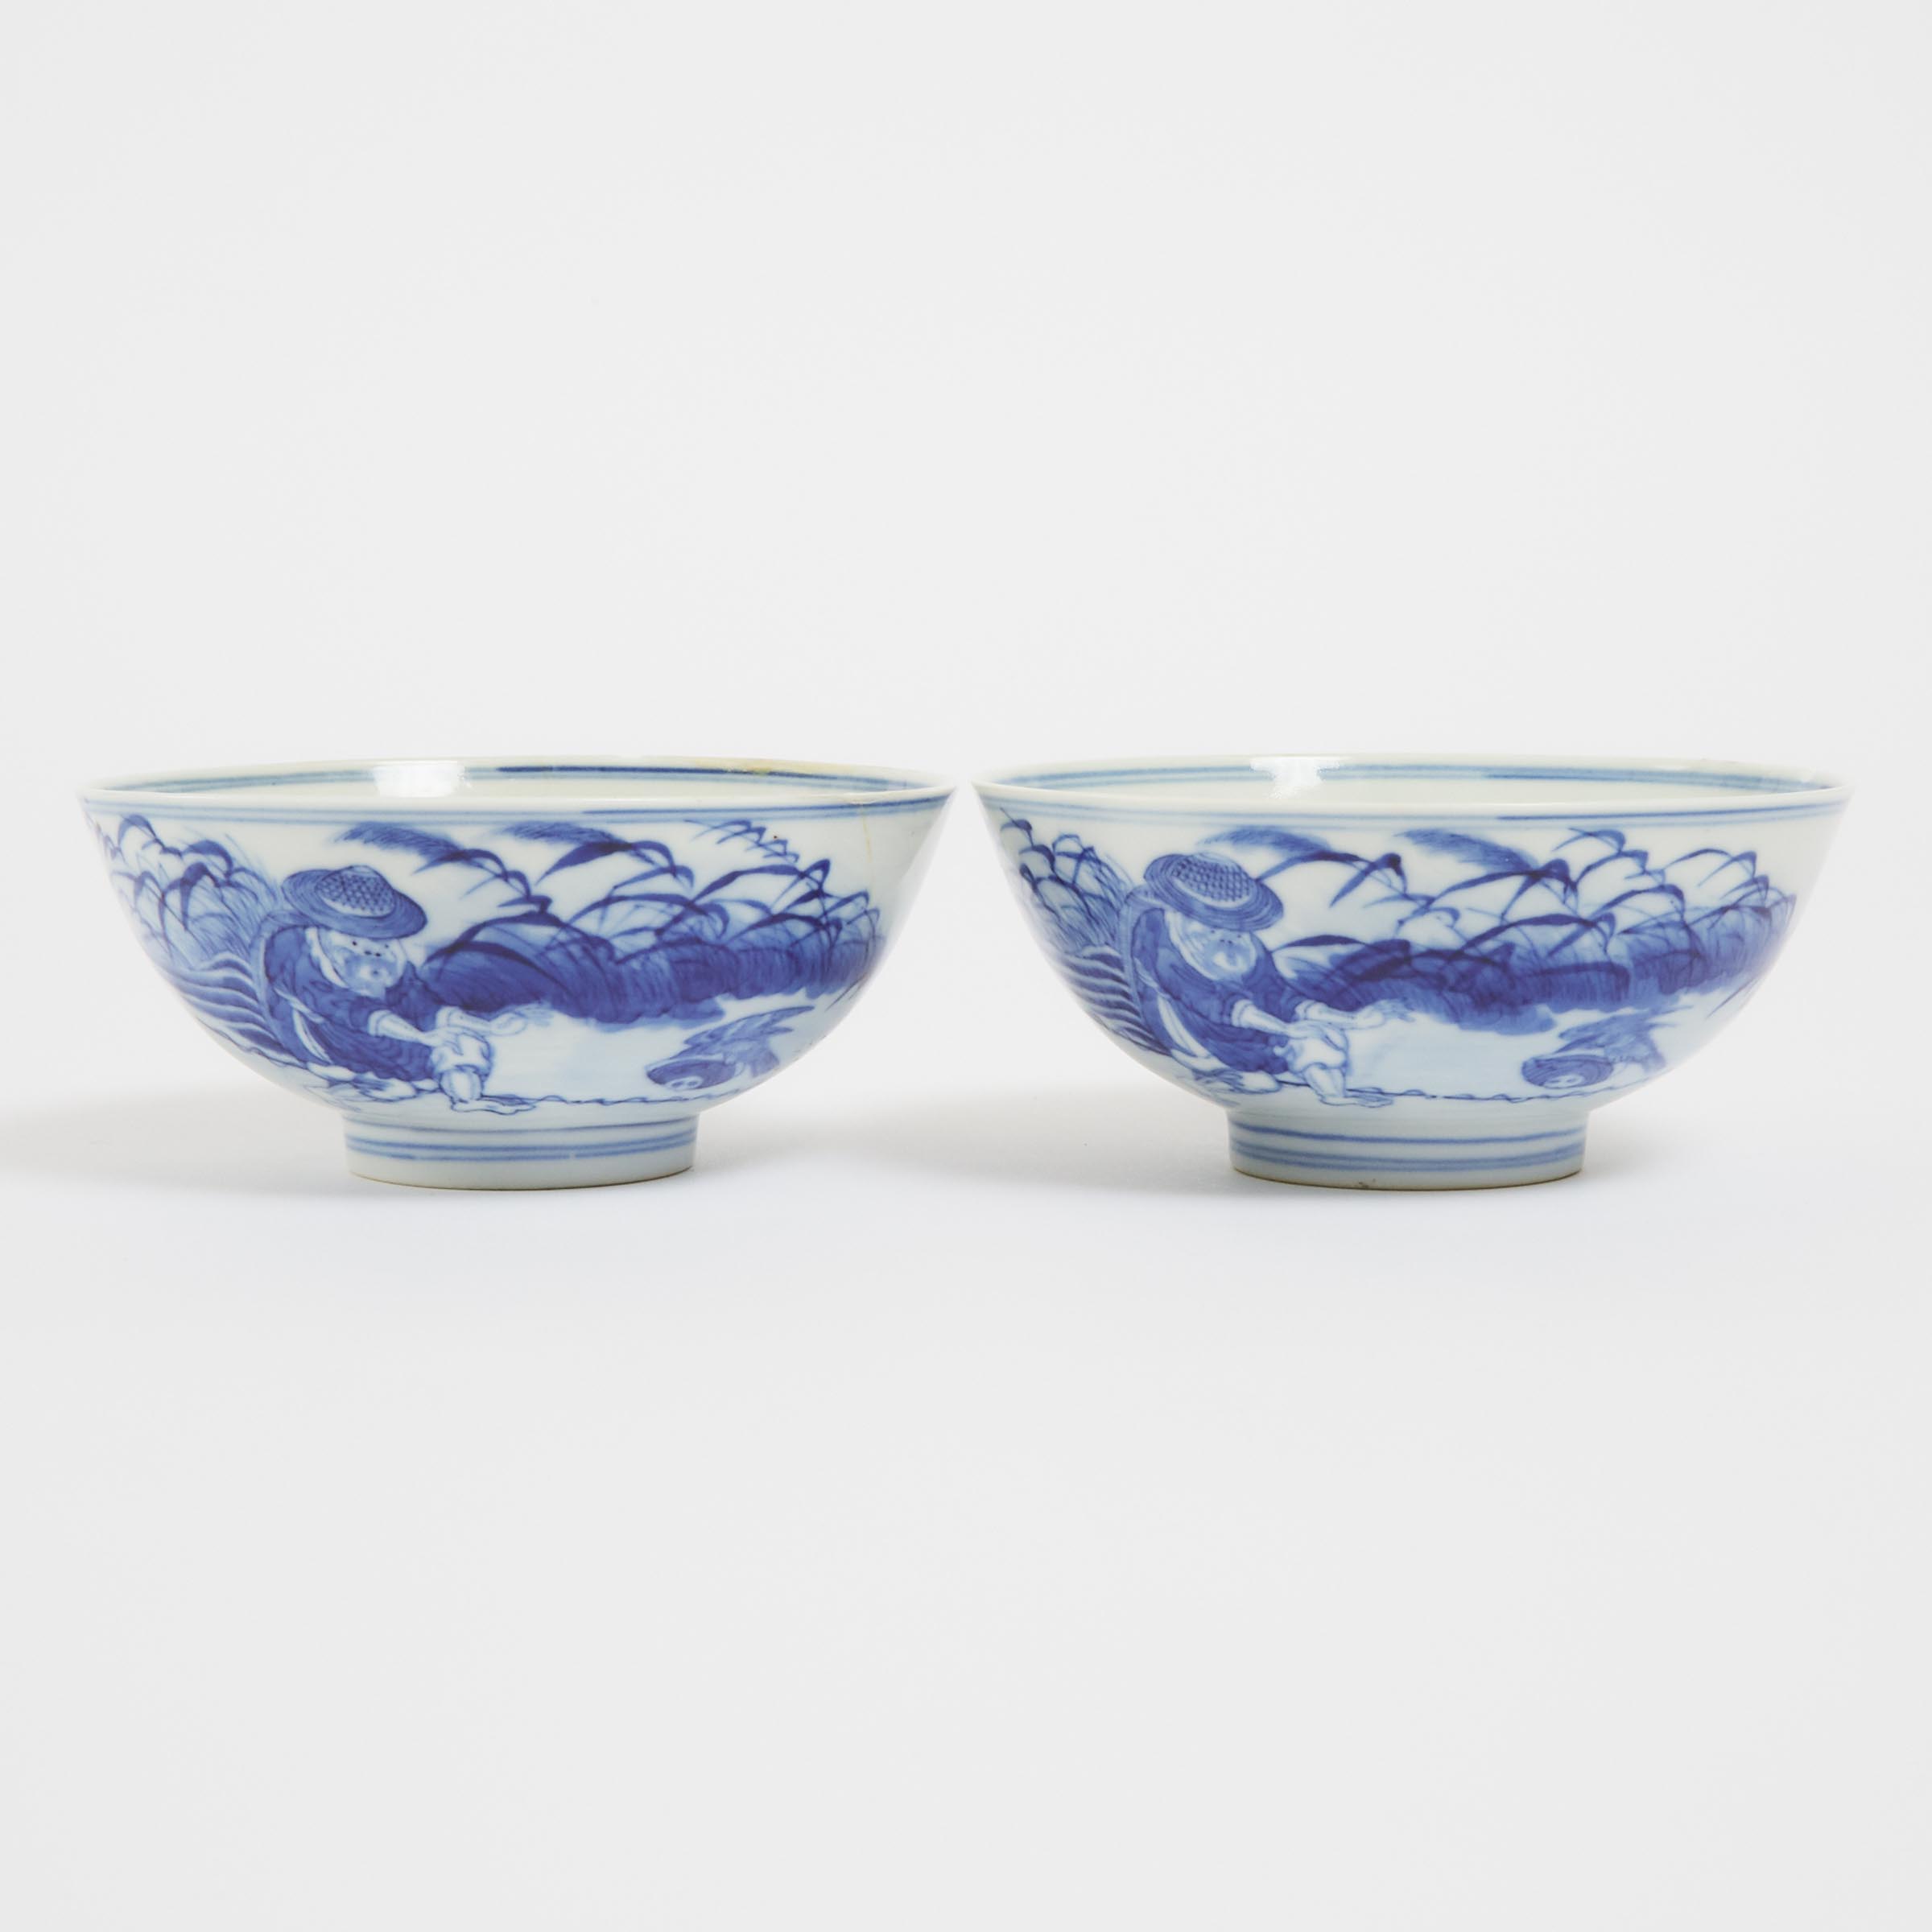 A Pair of Blue and White 'Figural' Bowls, Circa 1920